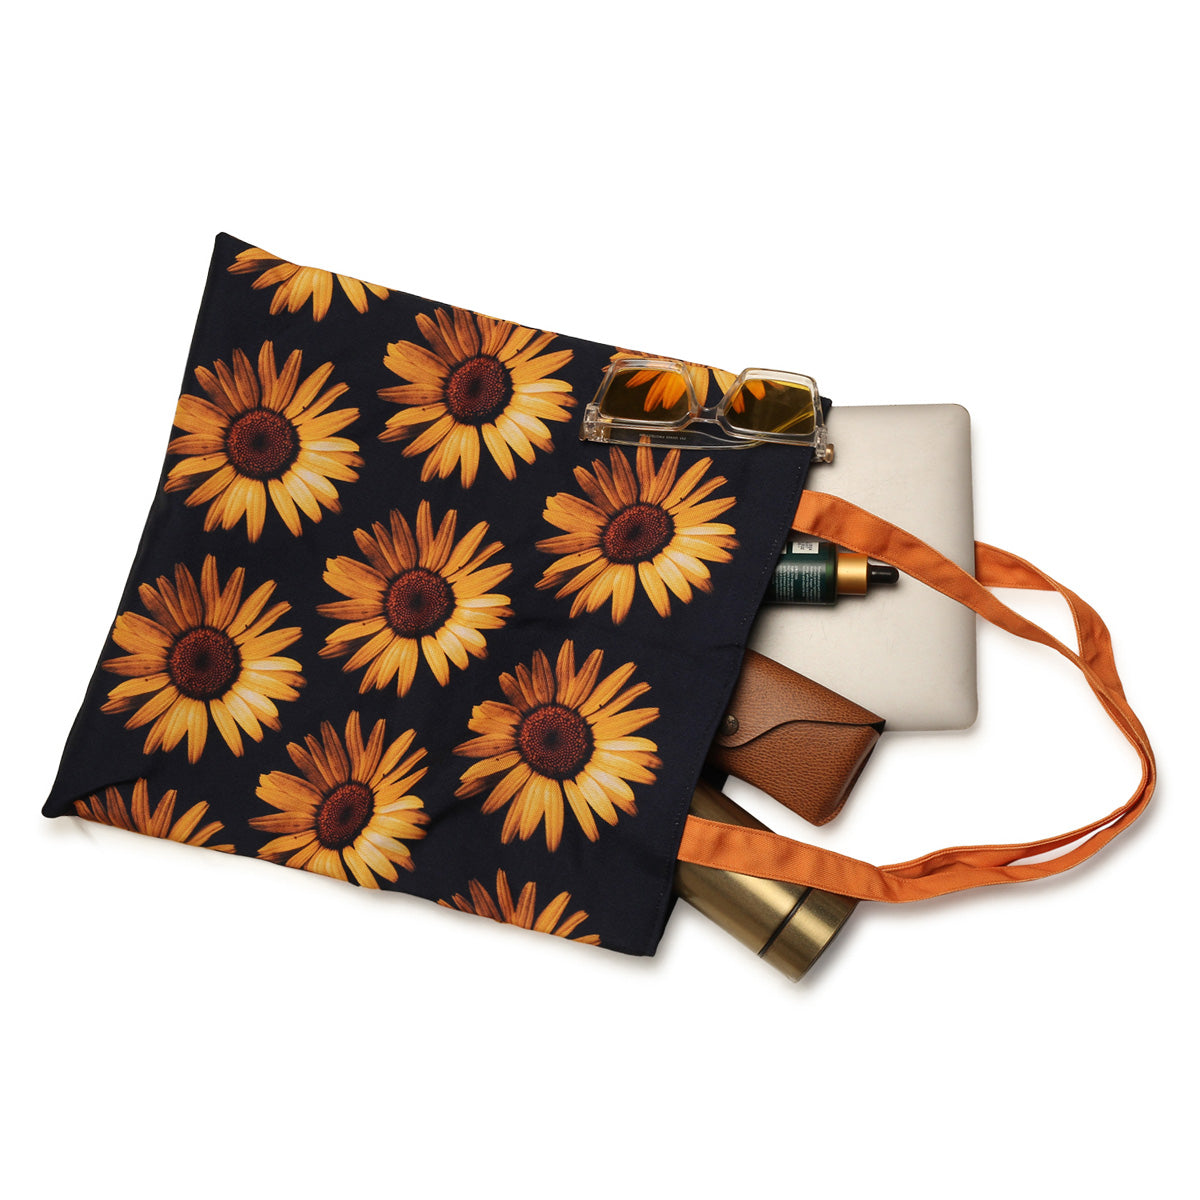 A stylish tote bag with black and orange colors, adorned with beautiful sunflowers. Perfect for adding a pop of color to your outfit!